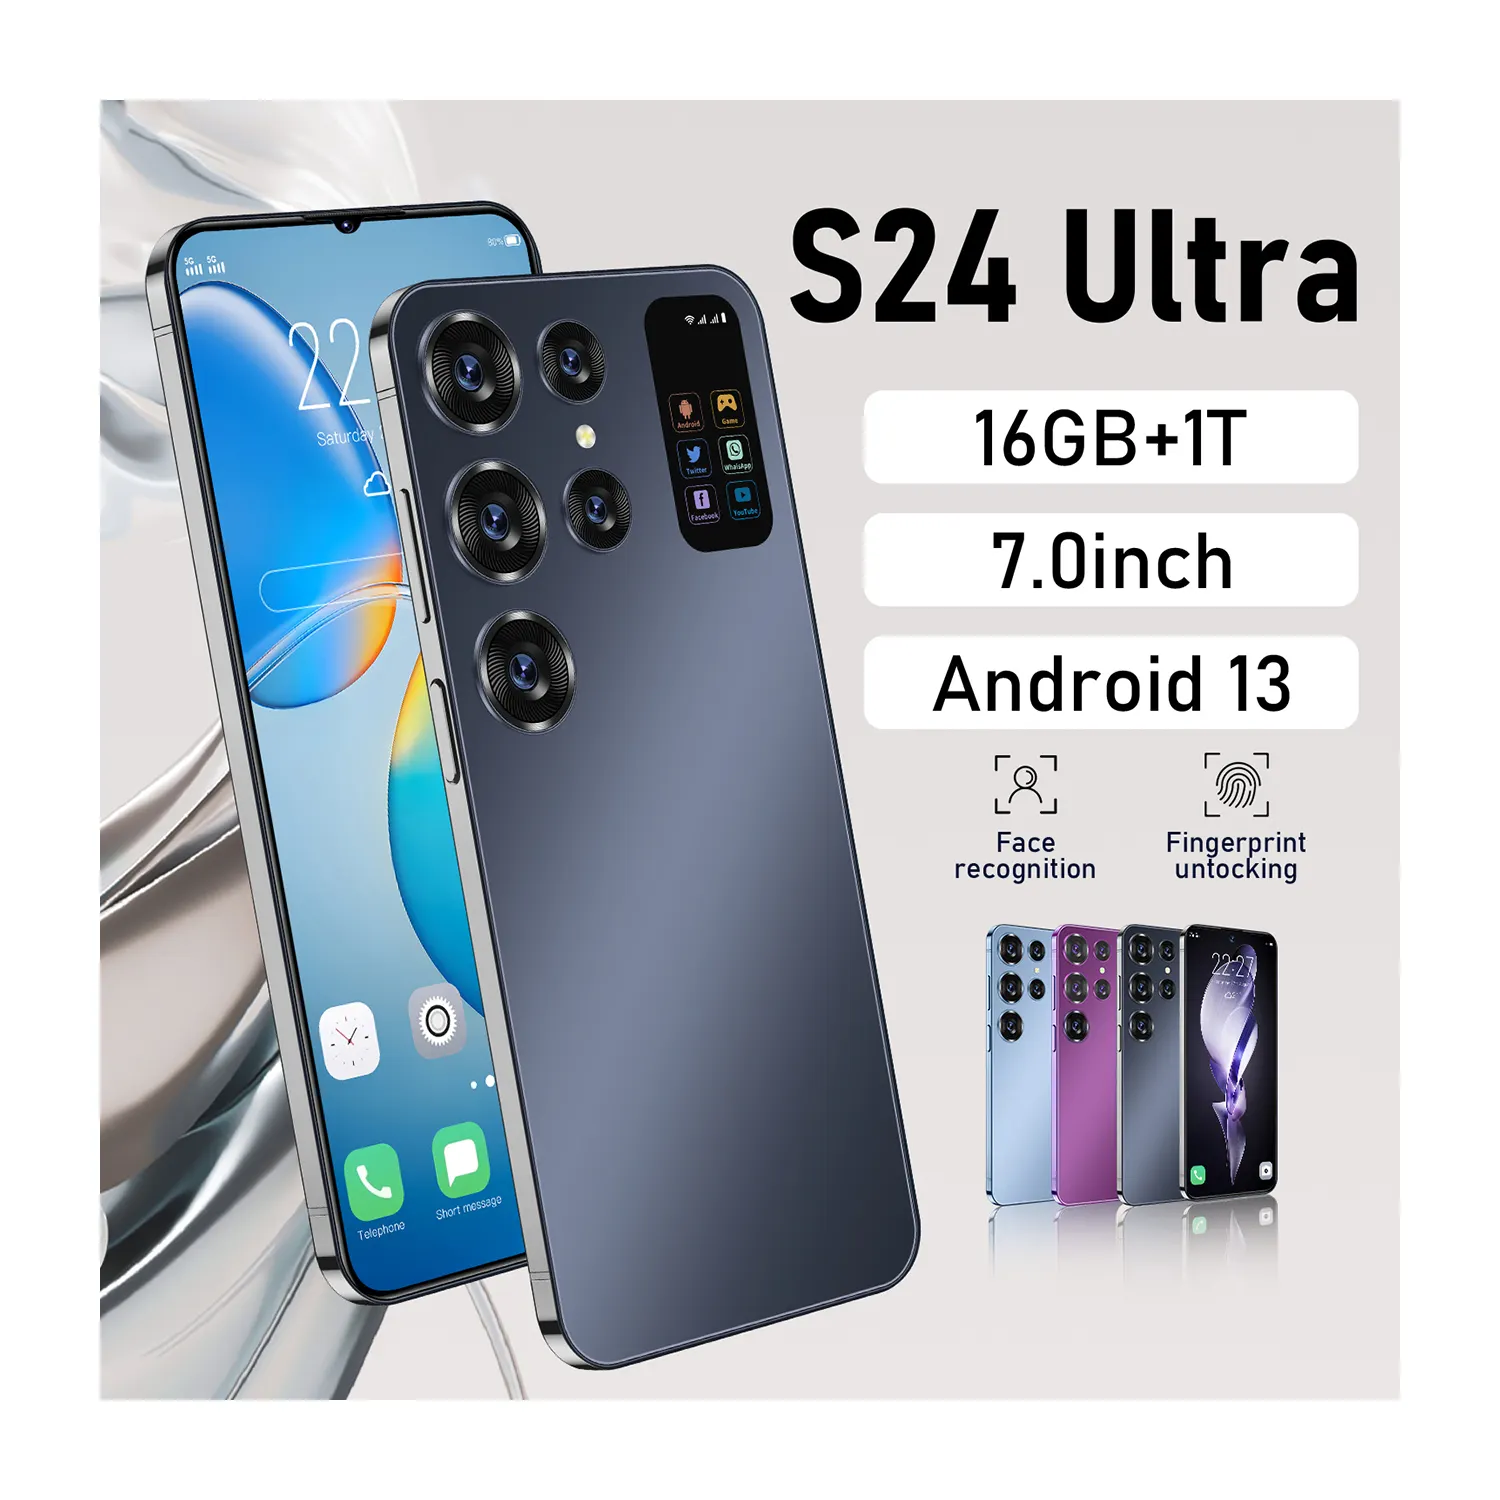 Imitate Smartphone S24 Ultra Cellphone 16GB+512GB Smartphone 7inch Unlocked dual card 5G Phones Android 13.0 Mobile phones